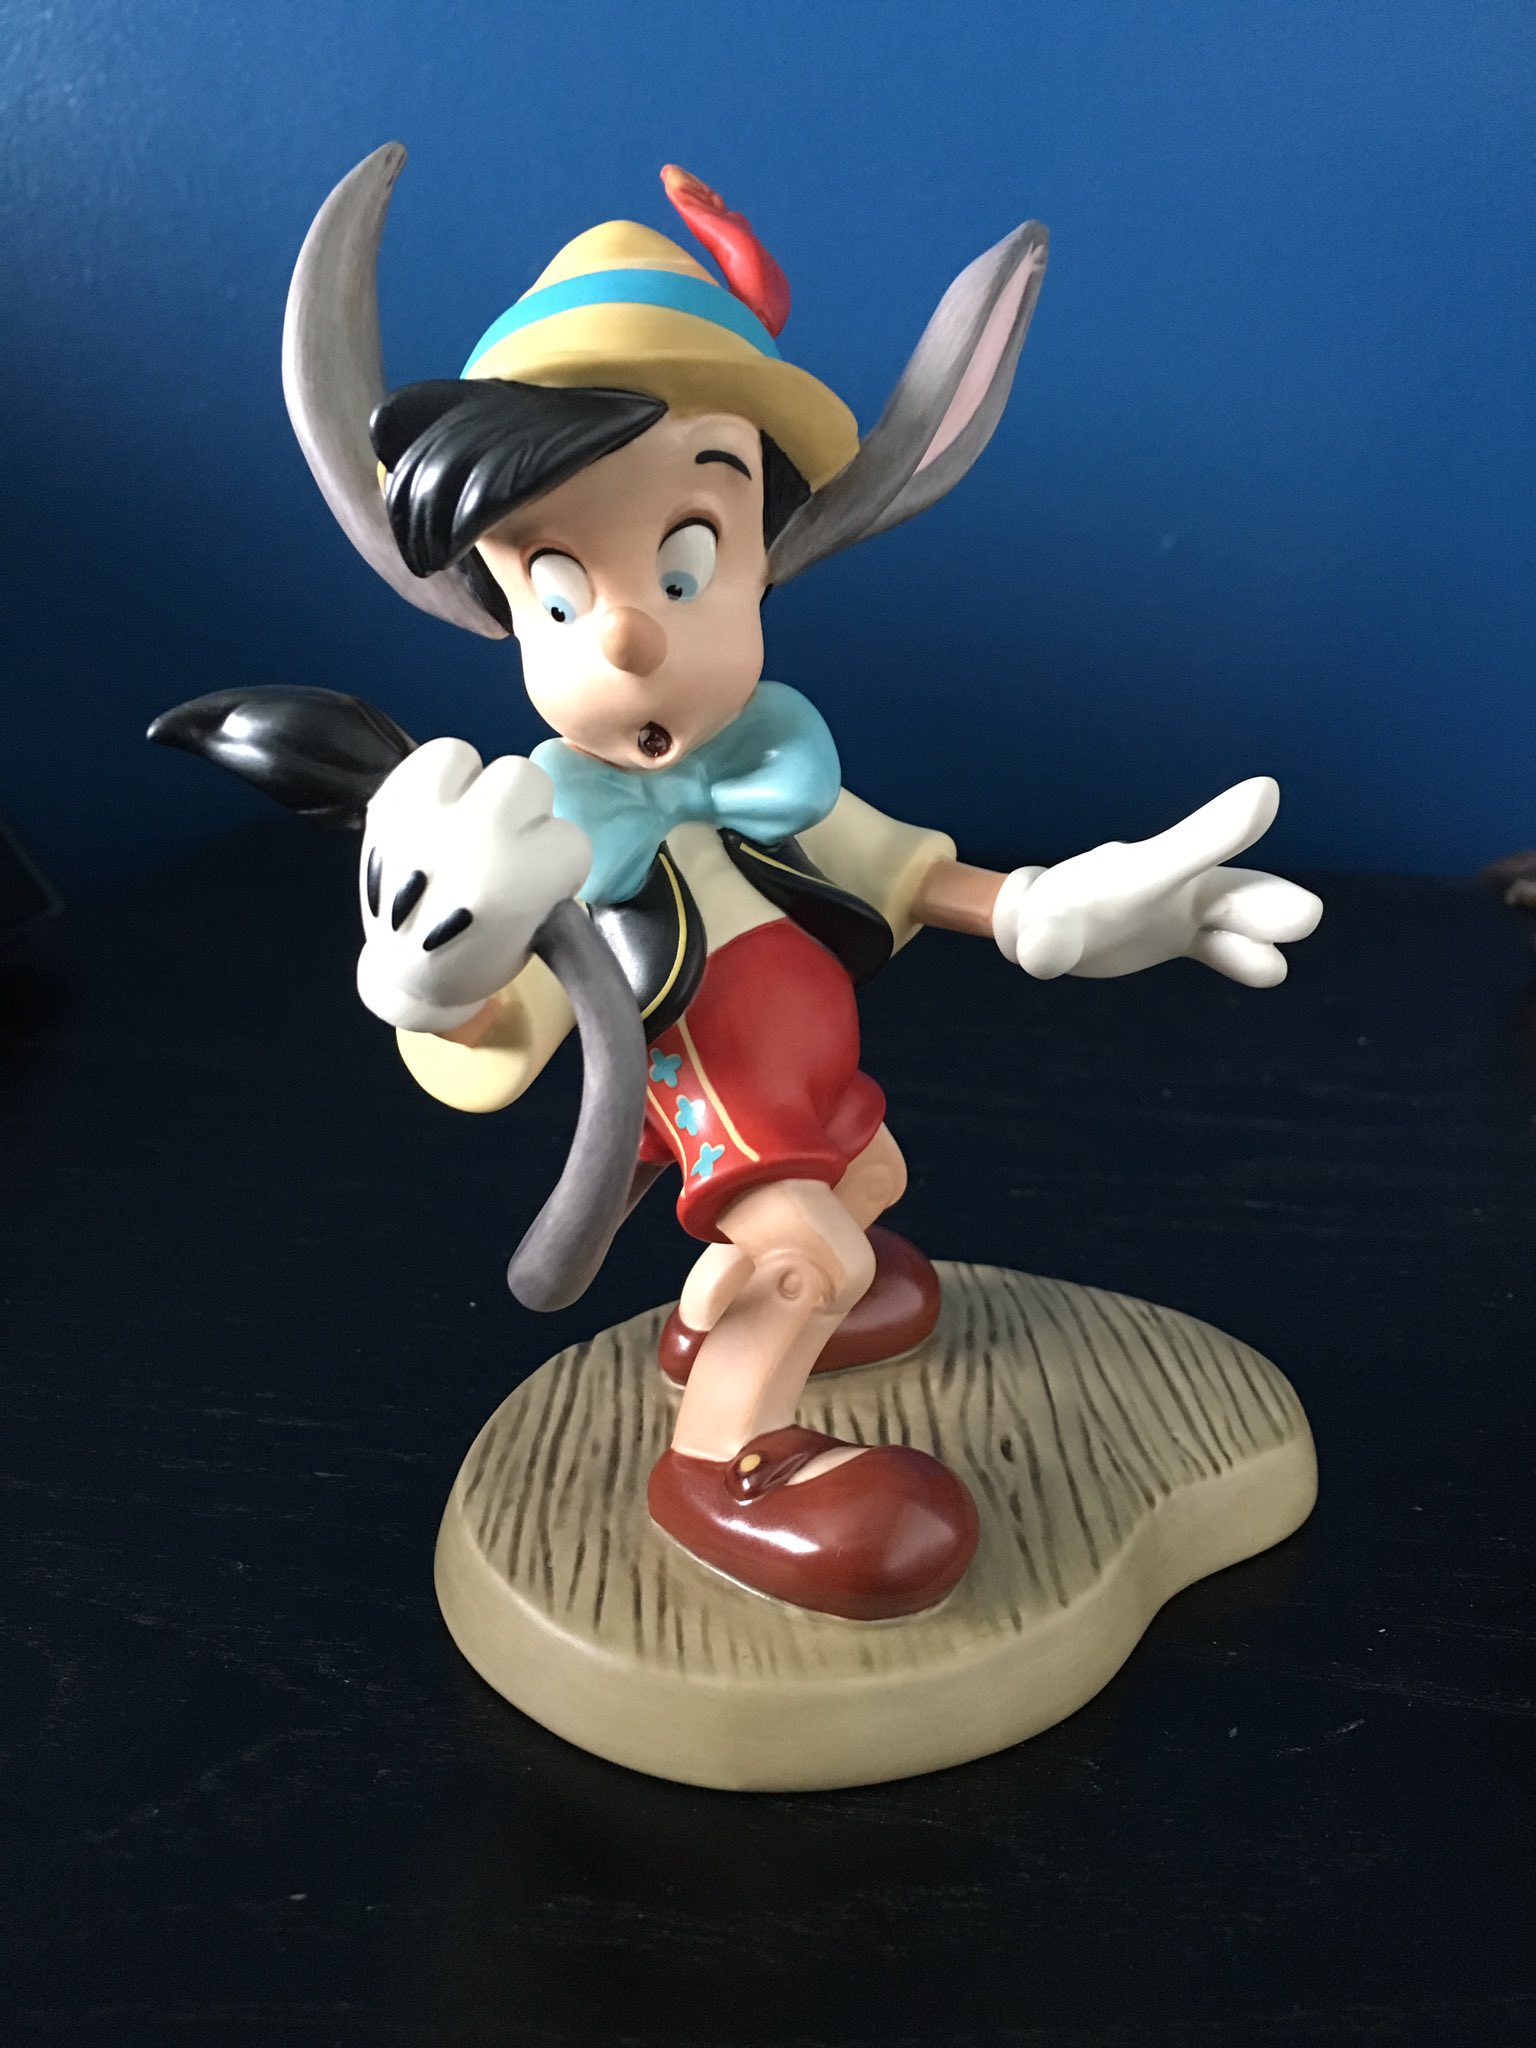 Pinocchio A Terrifying Tail - figurine Walt Disney Classic Collection WDCC